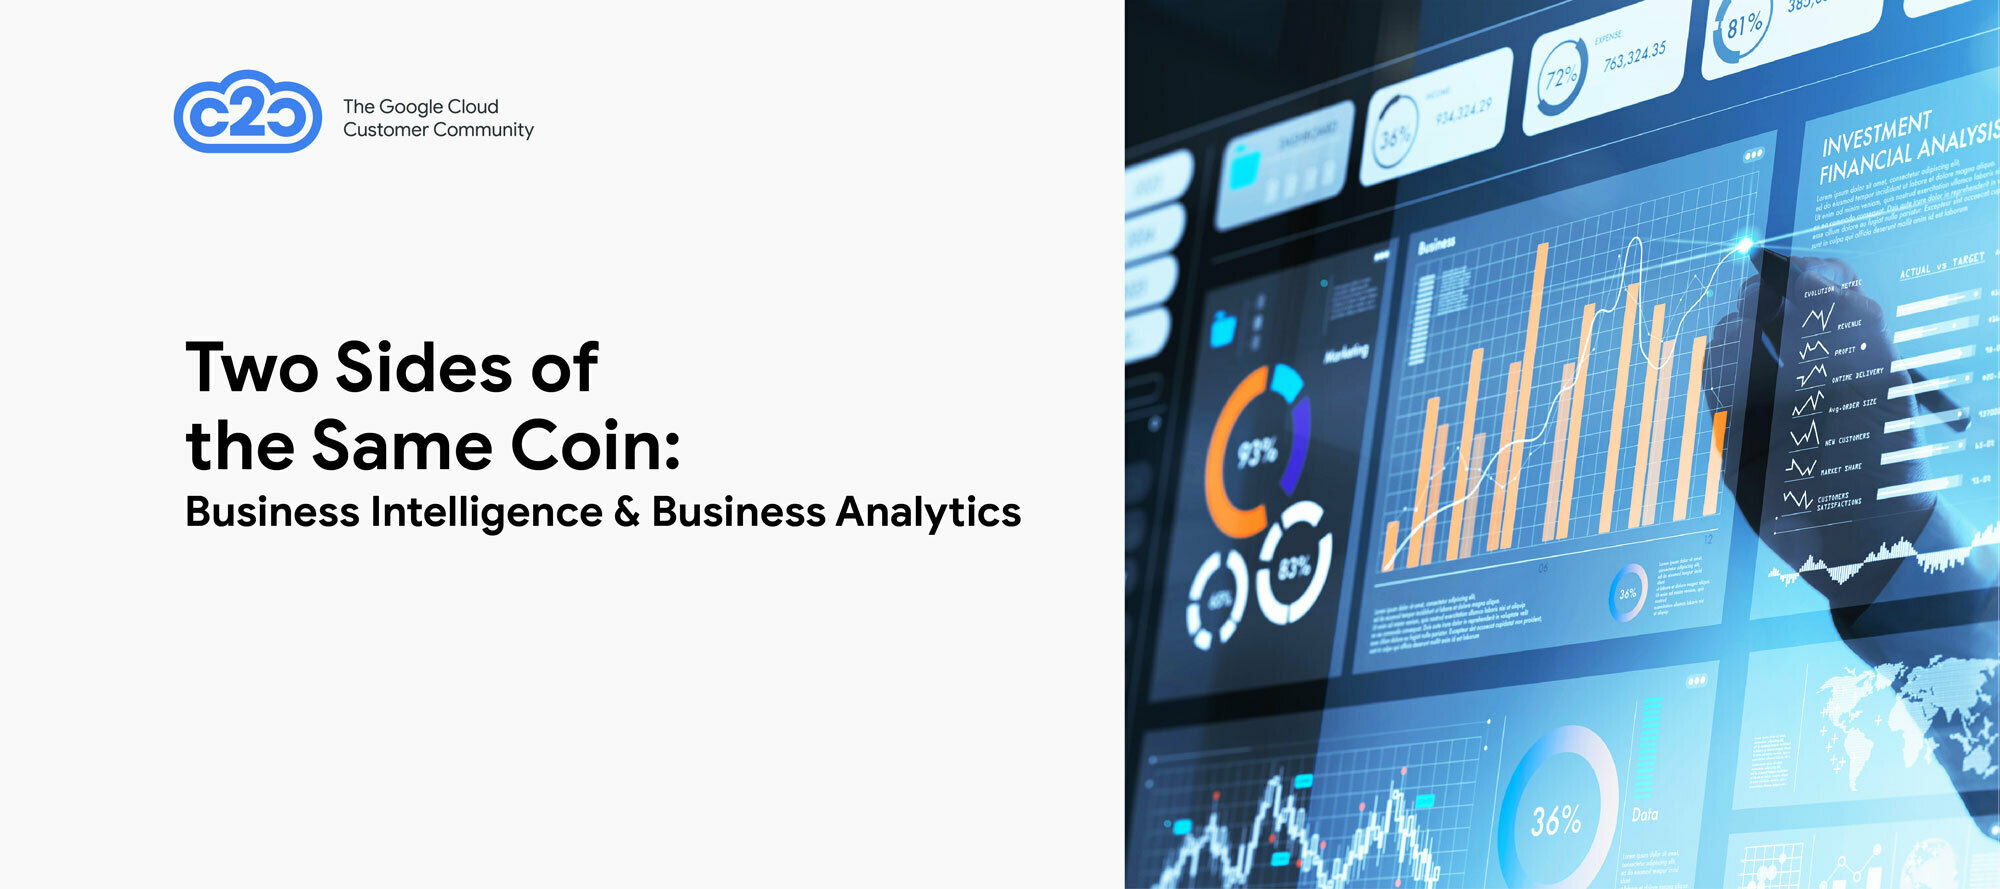 Two Sides of the Same Coin: Business Intelligence & Business Analytics